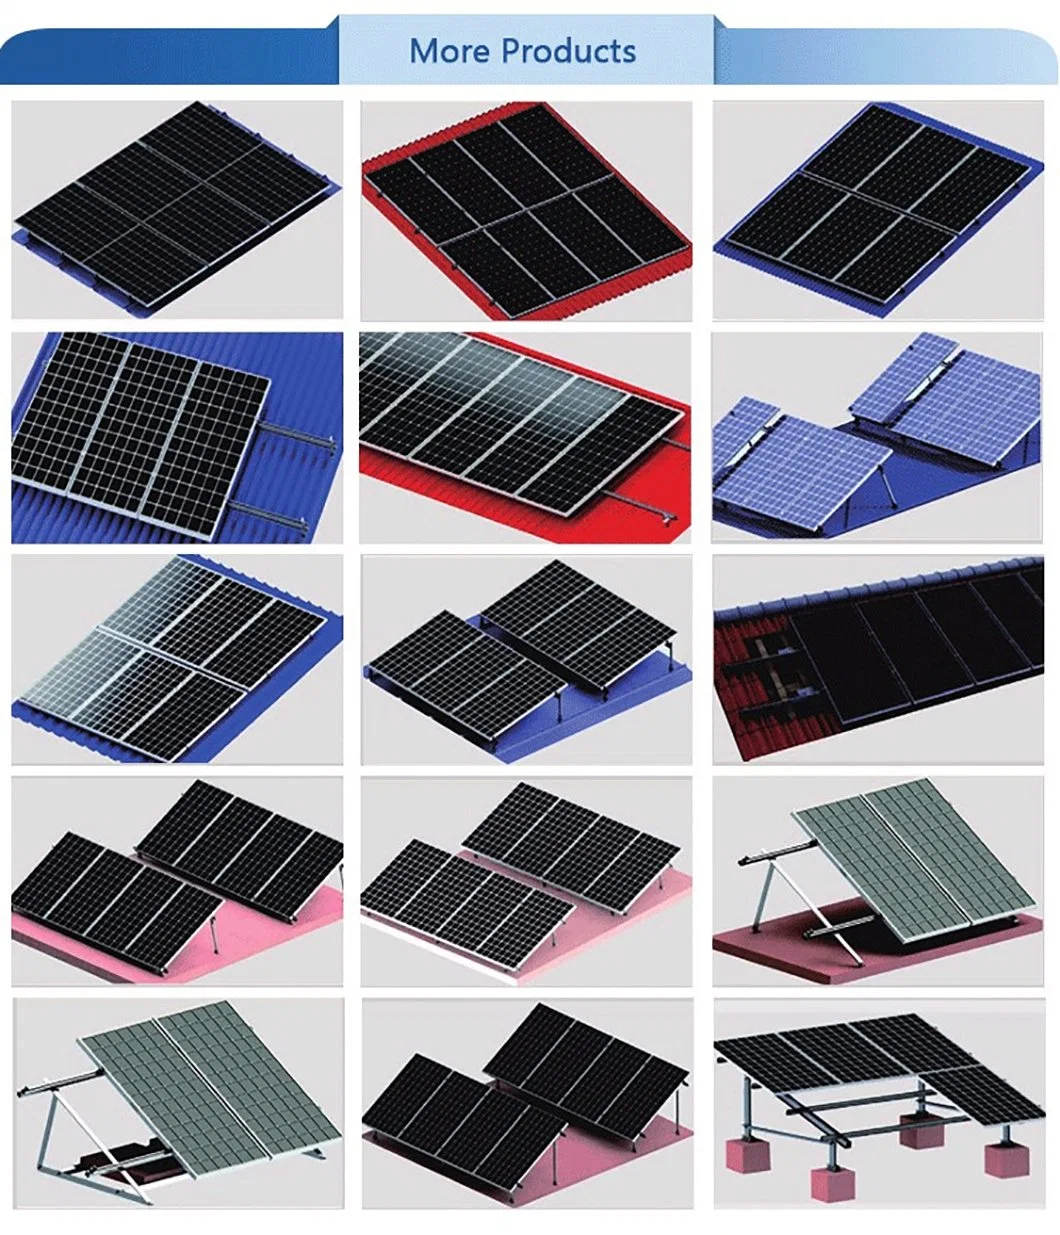 Ground Screw Photovoltaic Solar Mounting Structure System